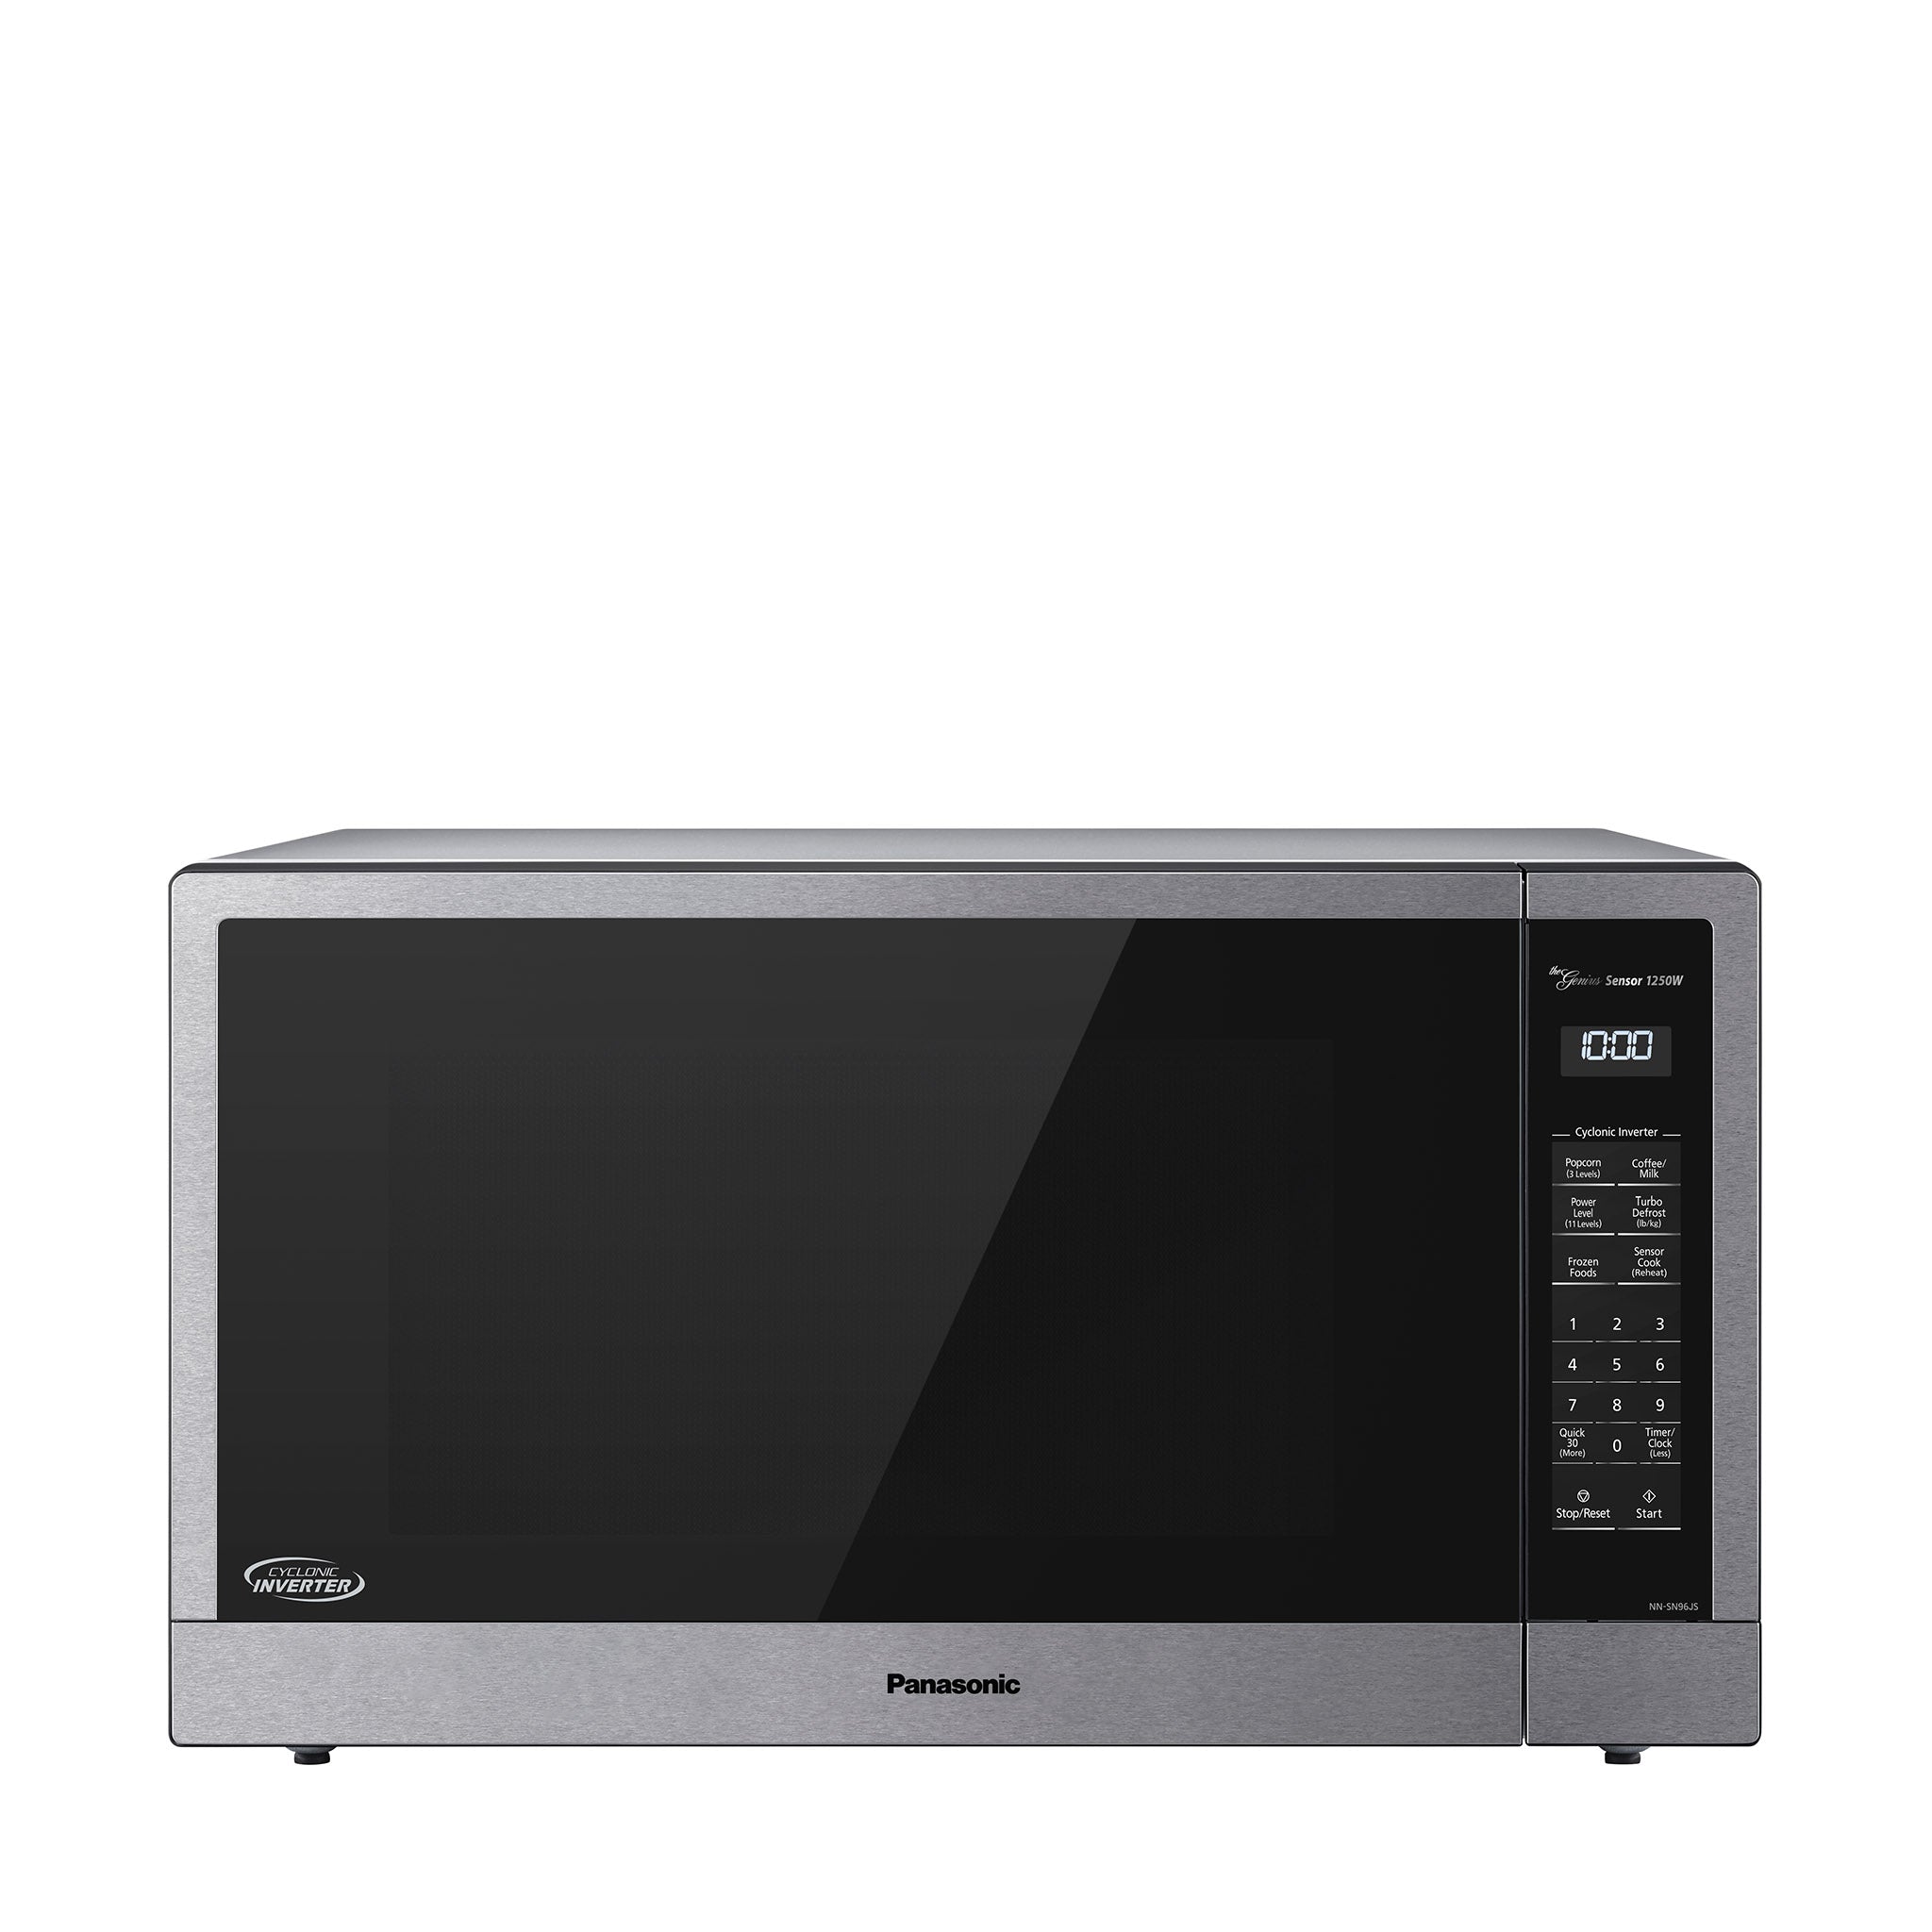 Panasonic Microwave Oven with Cyclonic Wave Inverter Technology 